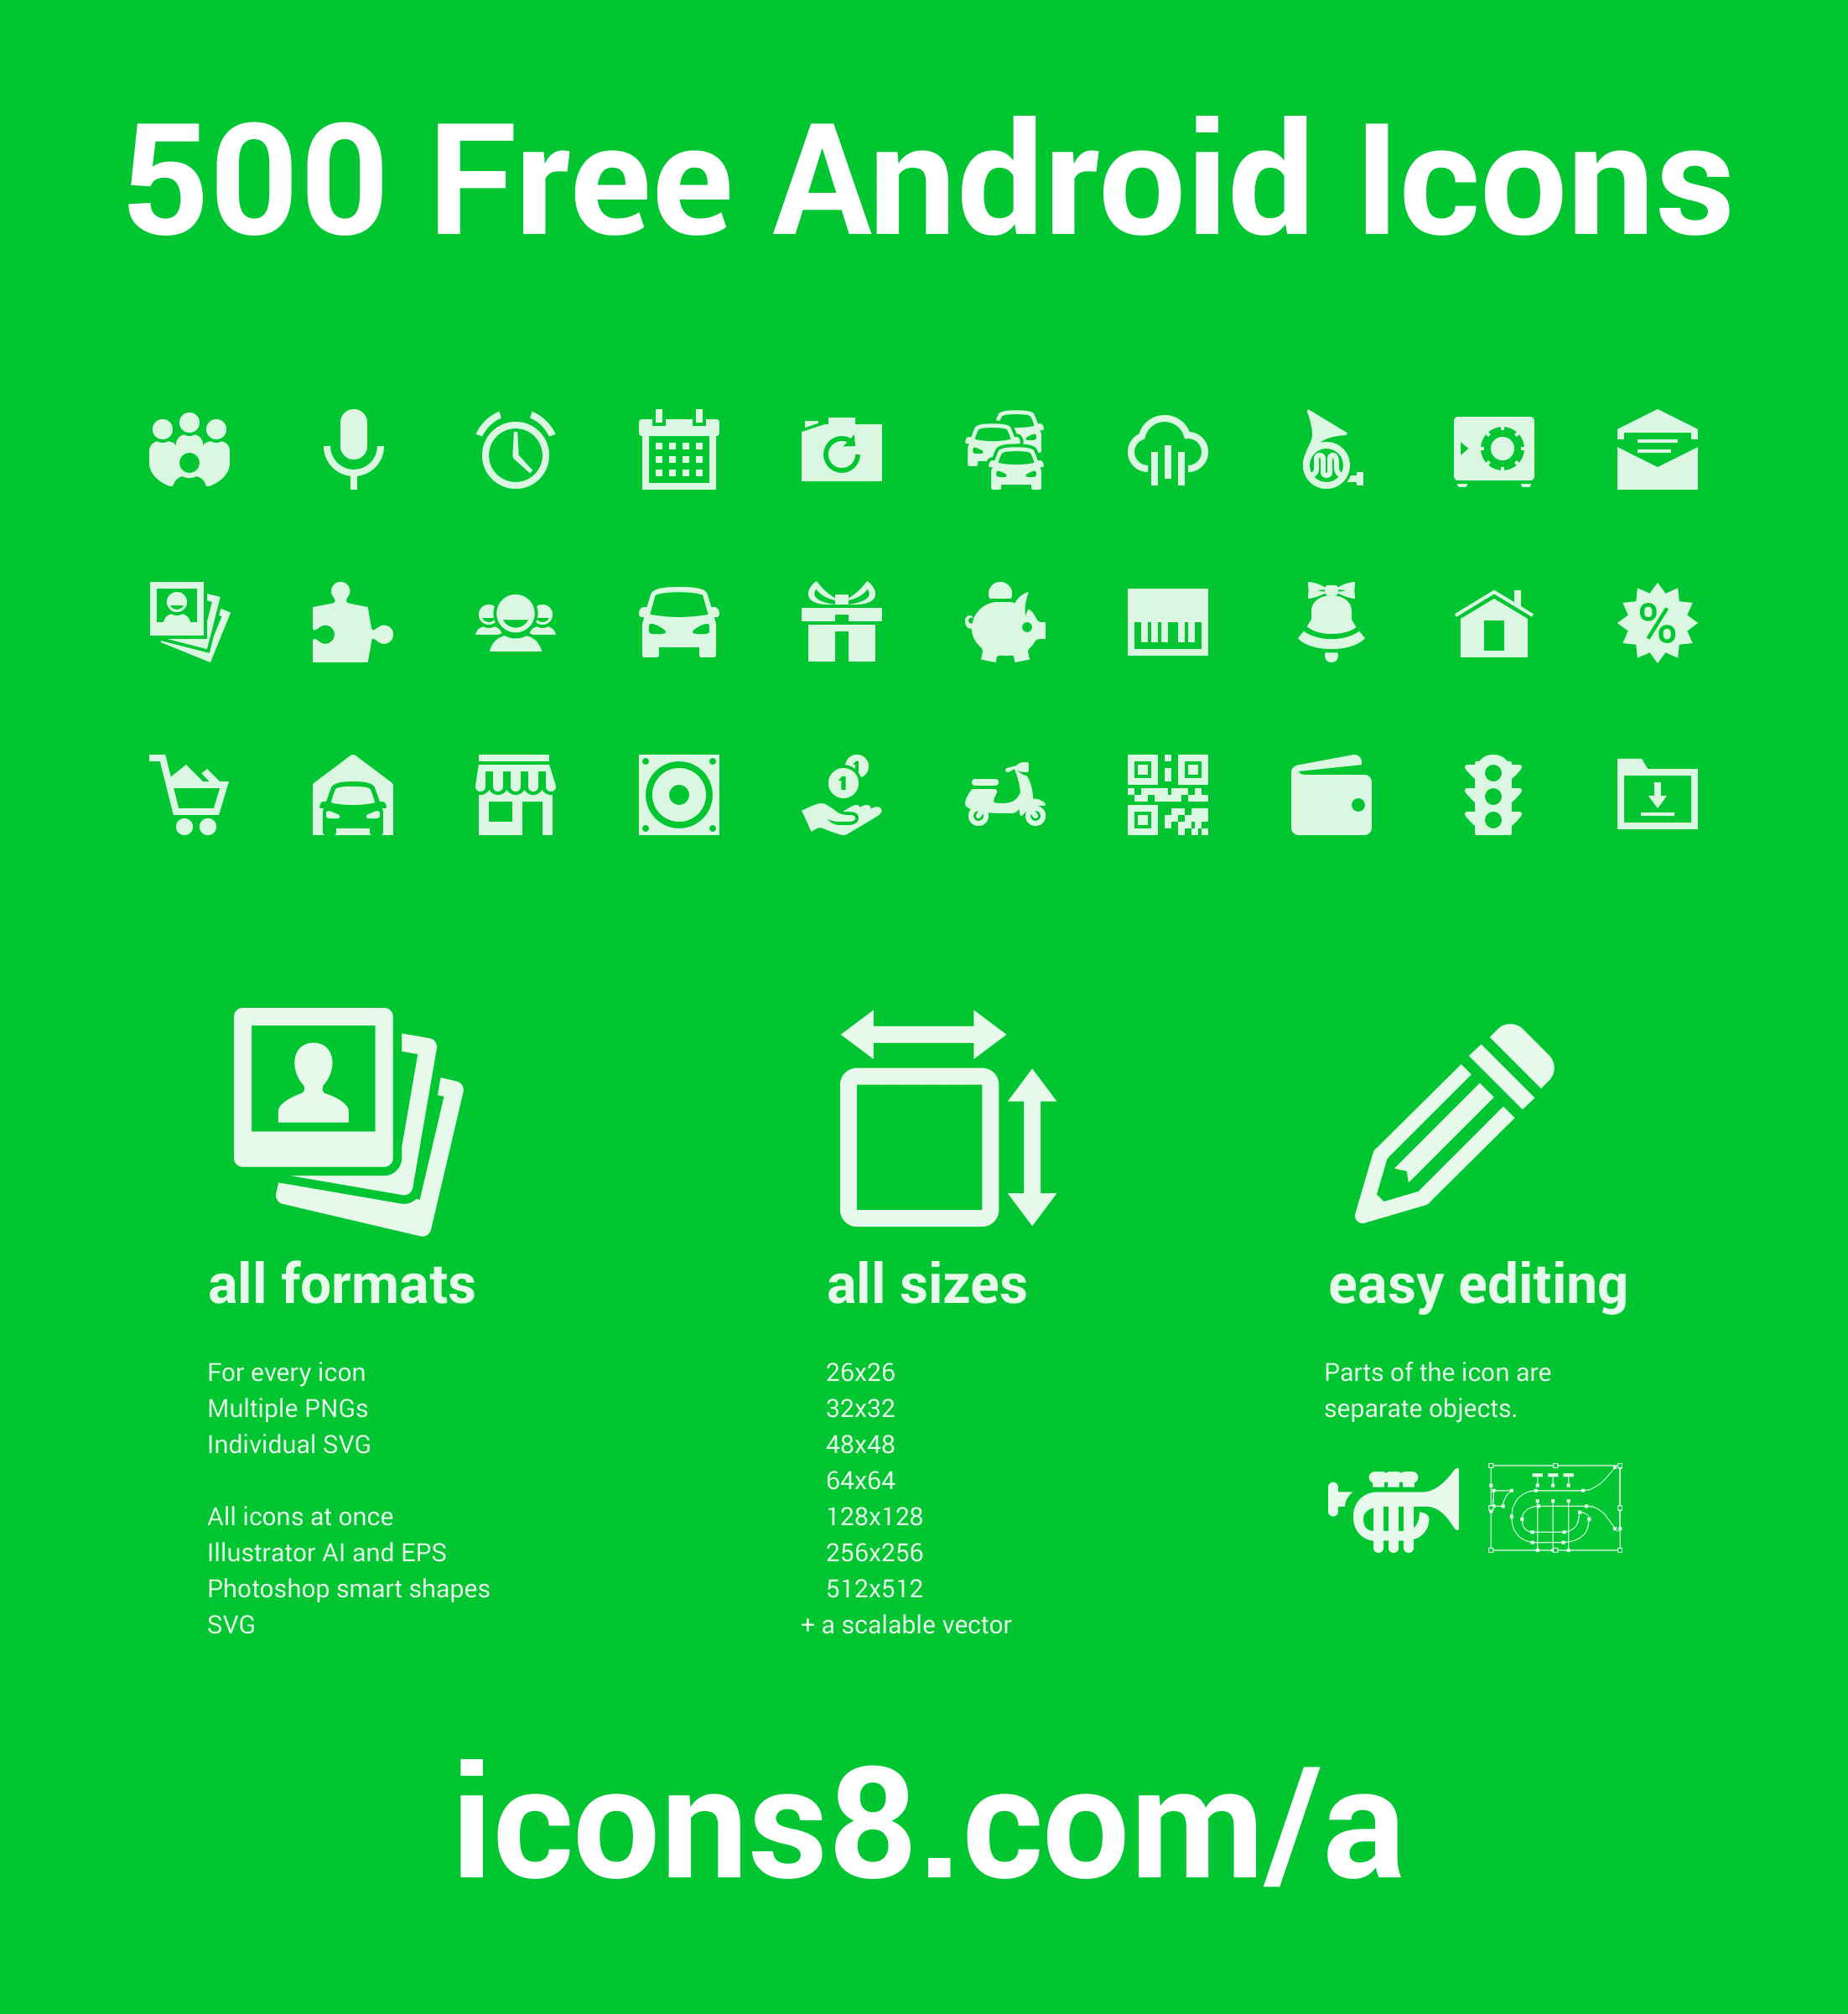 500 Free Android Icons